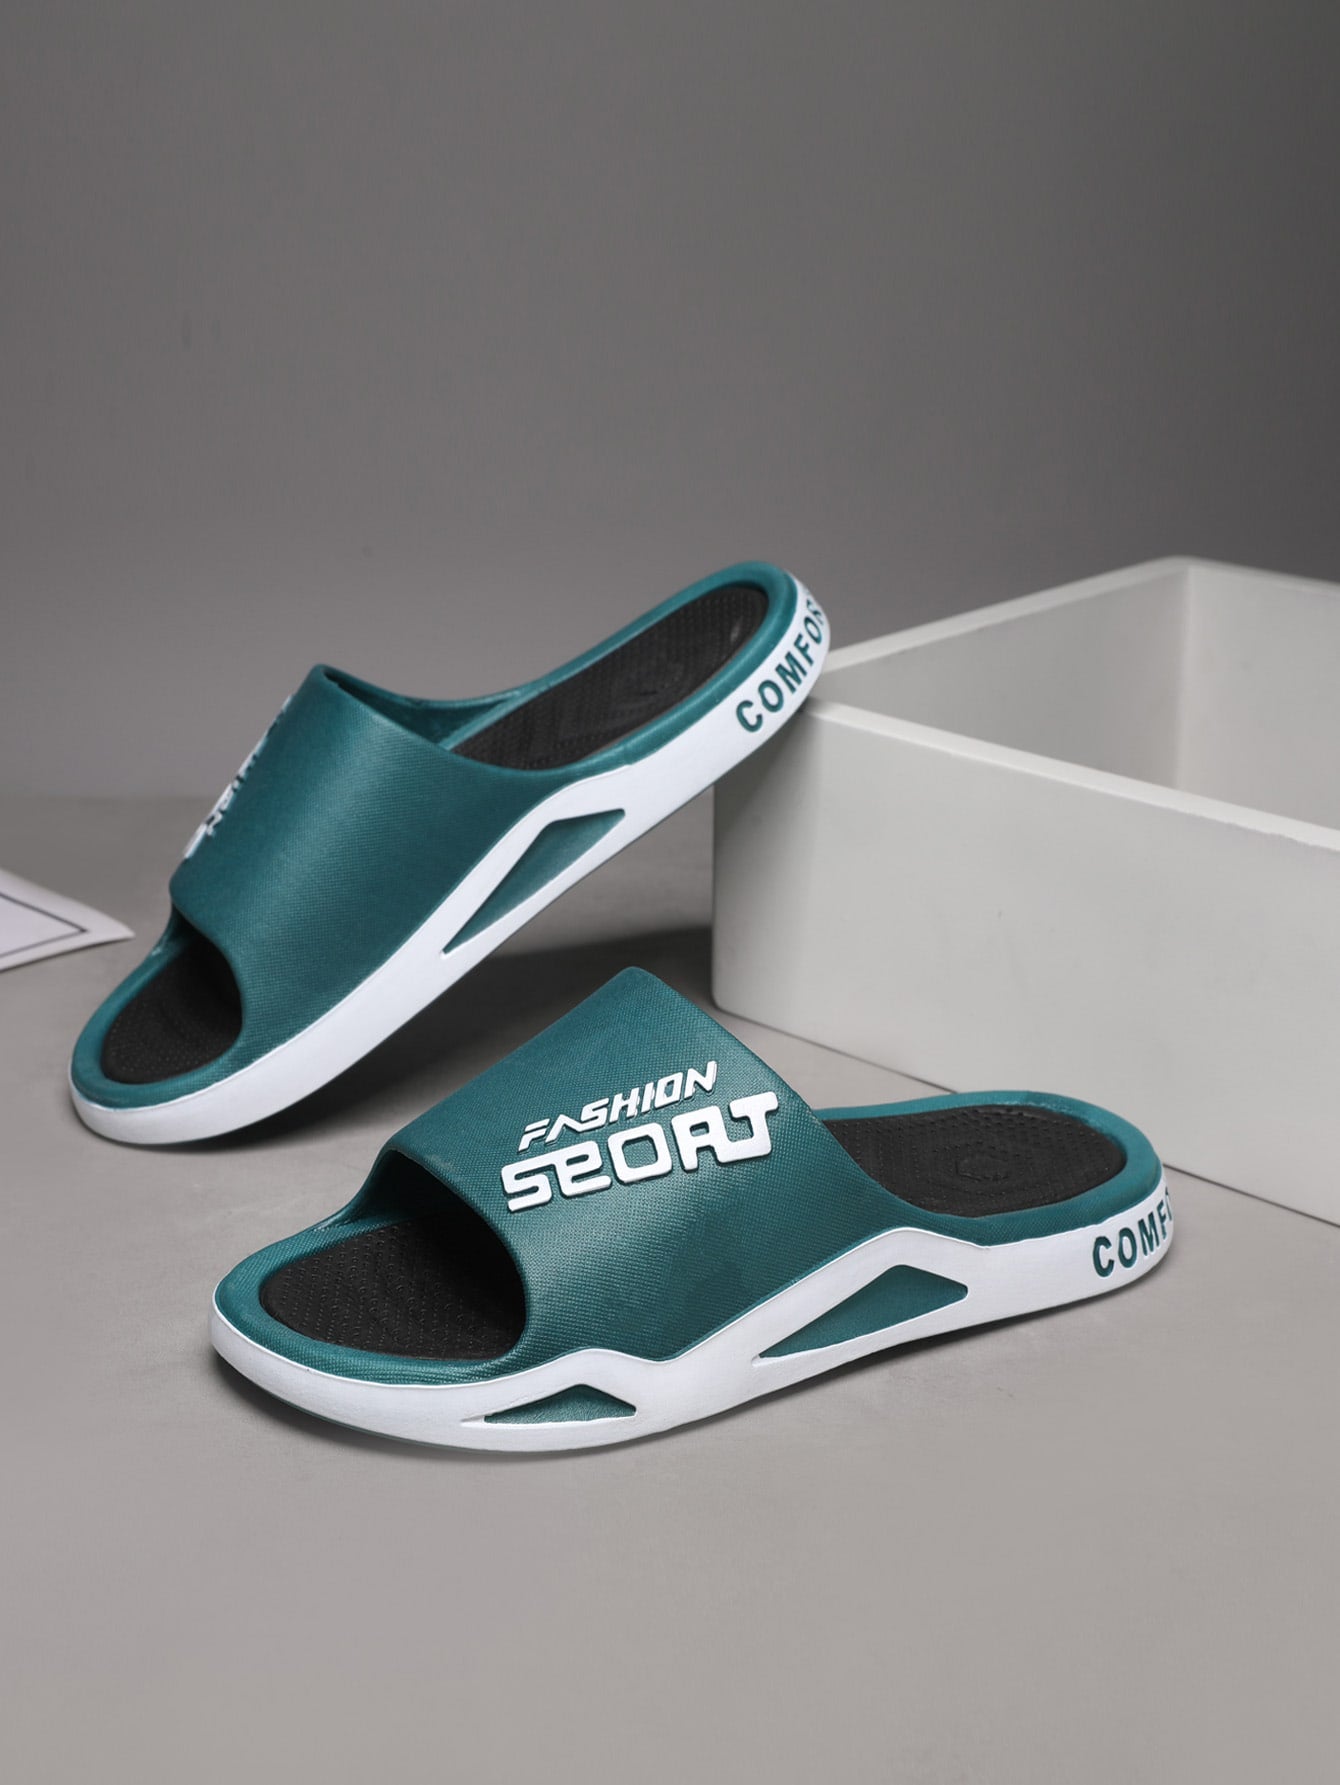 Fashionable & Comfortable Outdoor Slippers That Can Be Worn Outside